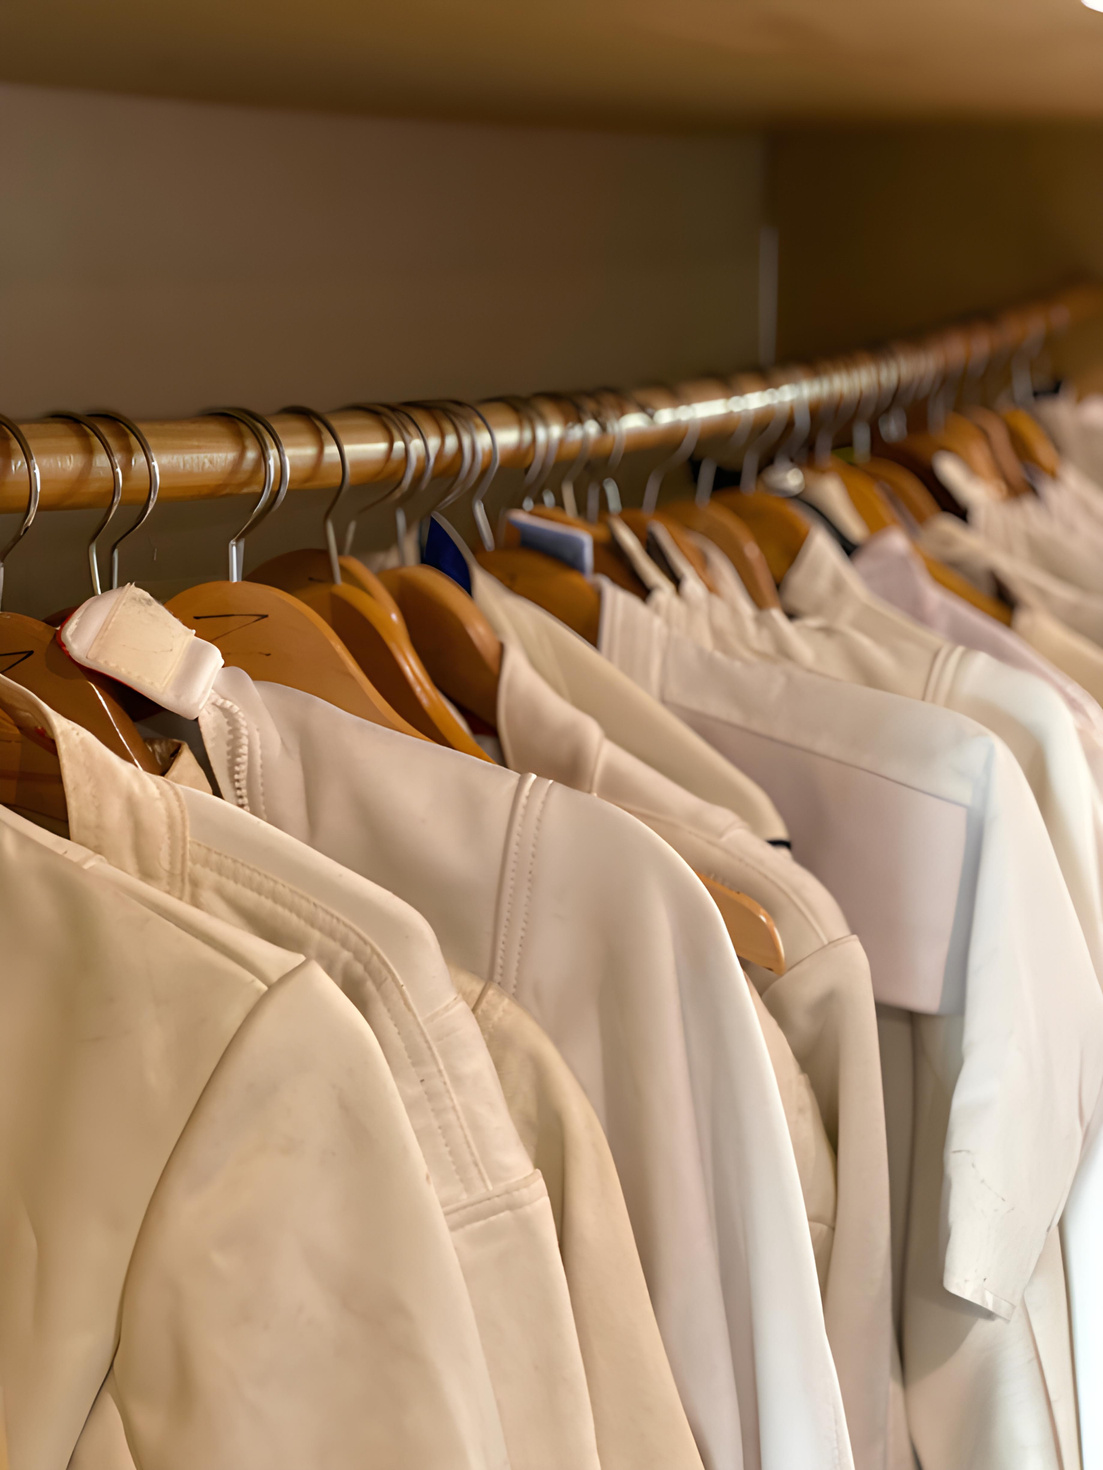 a row of saber fencing jacket hanging on a coat rack